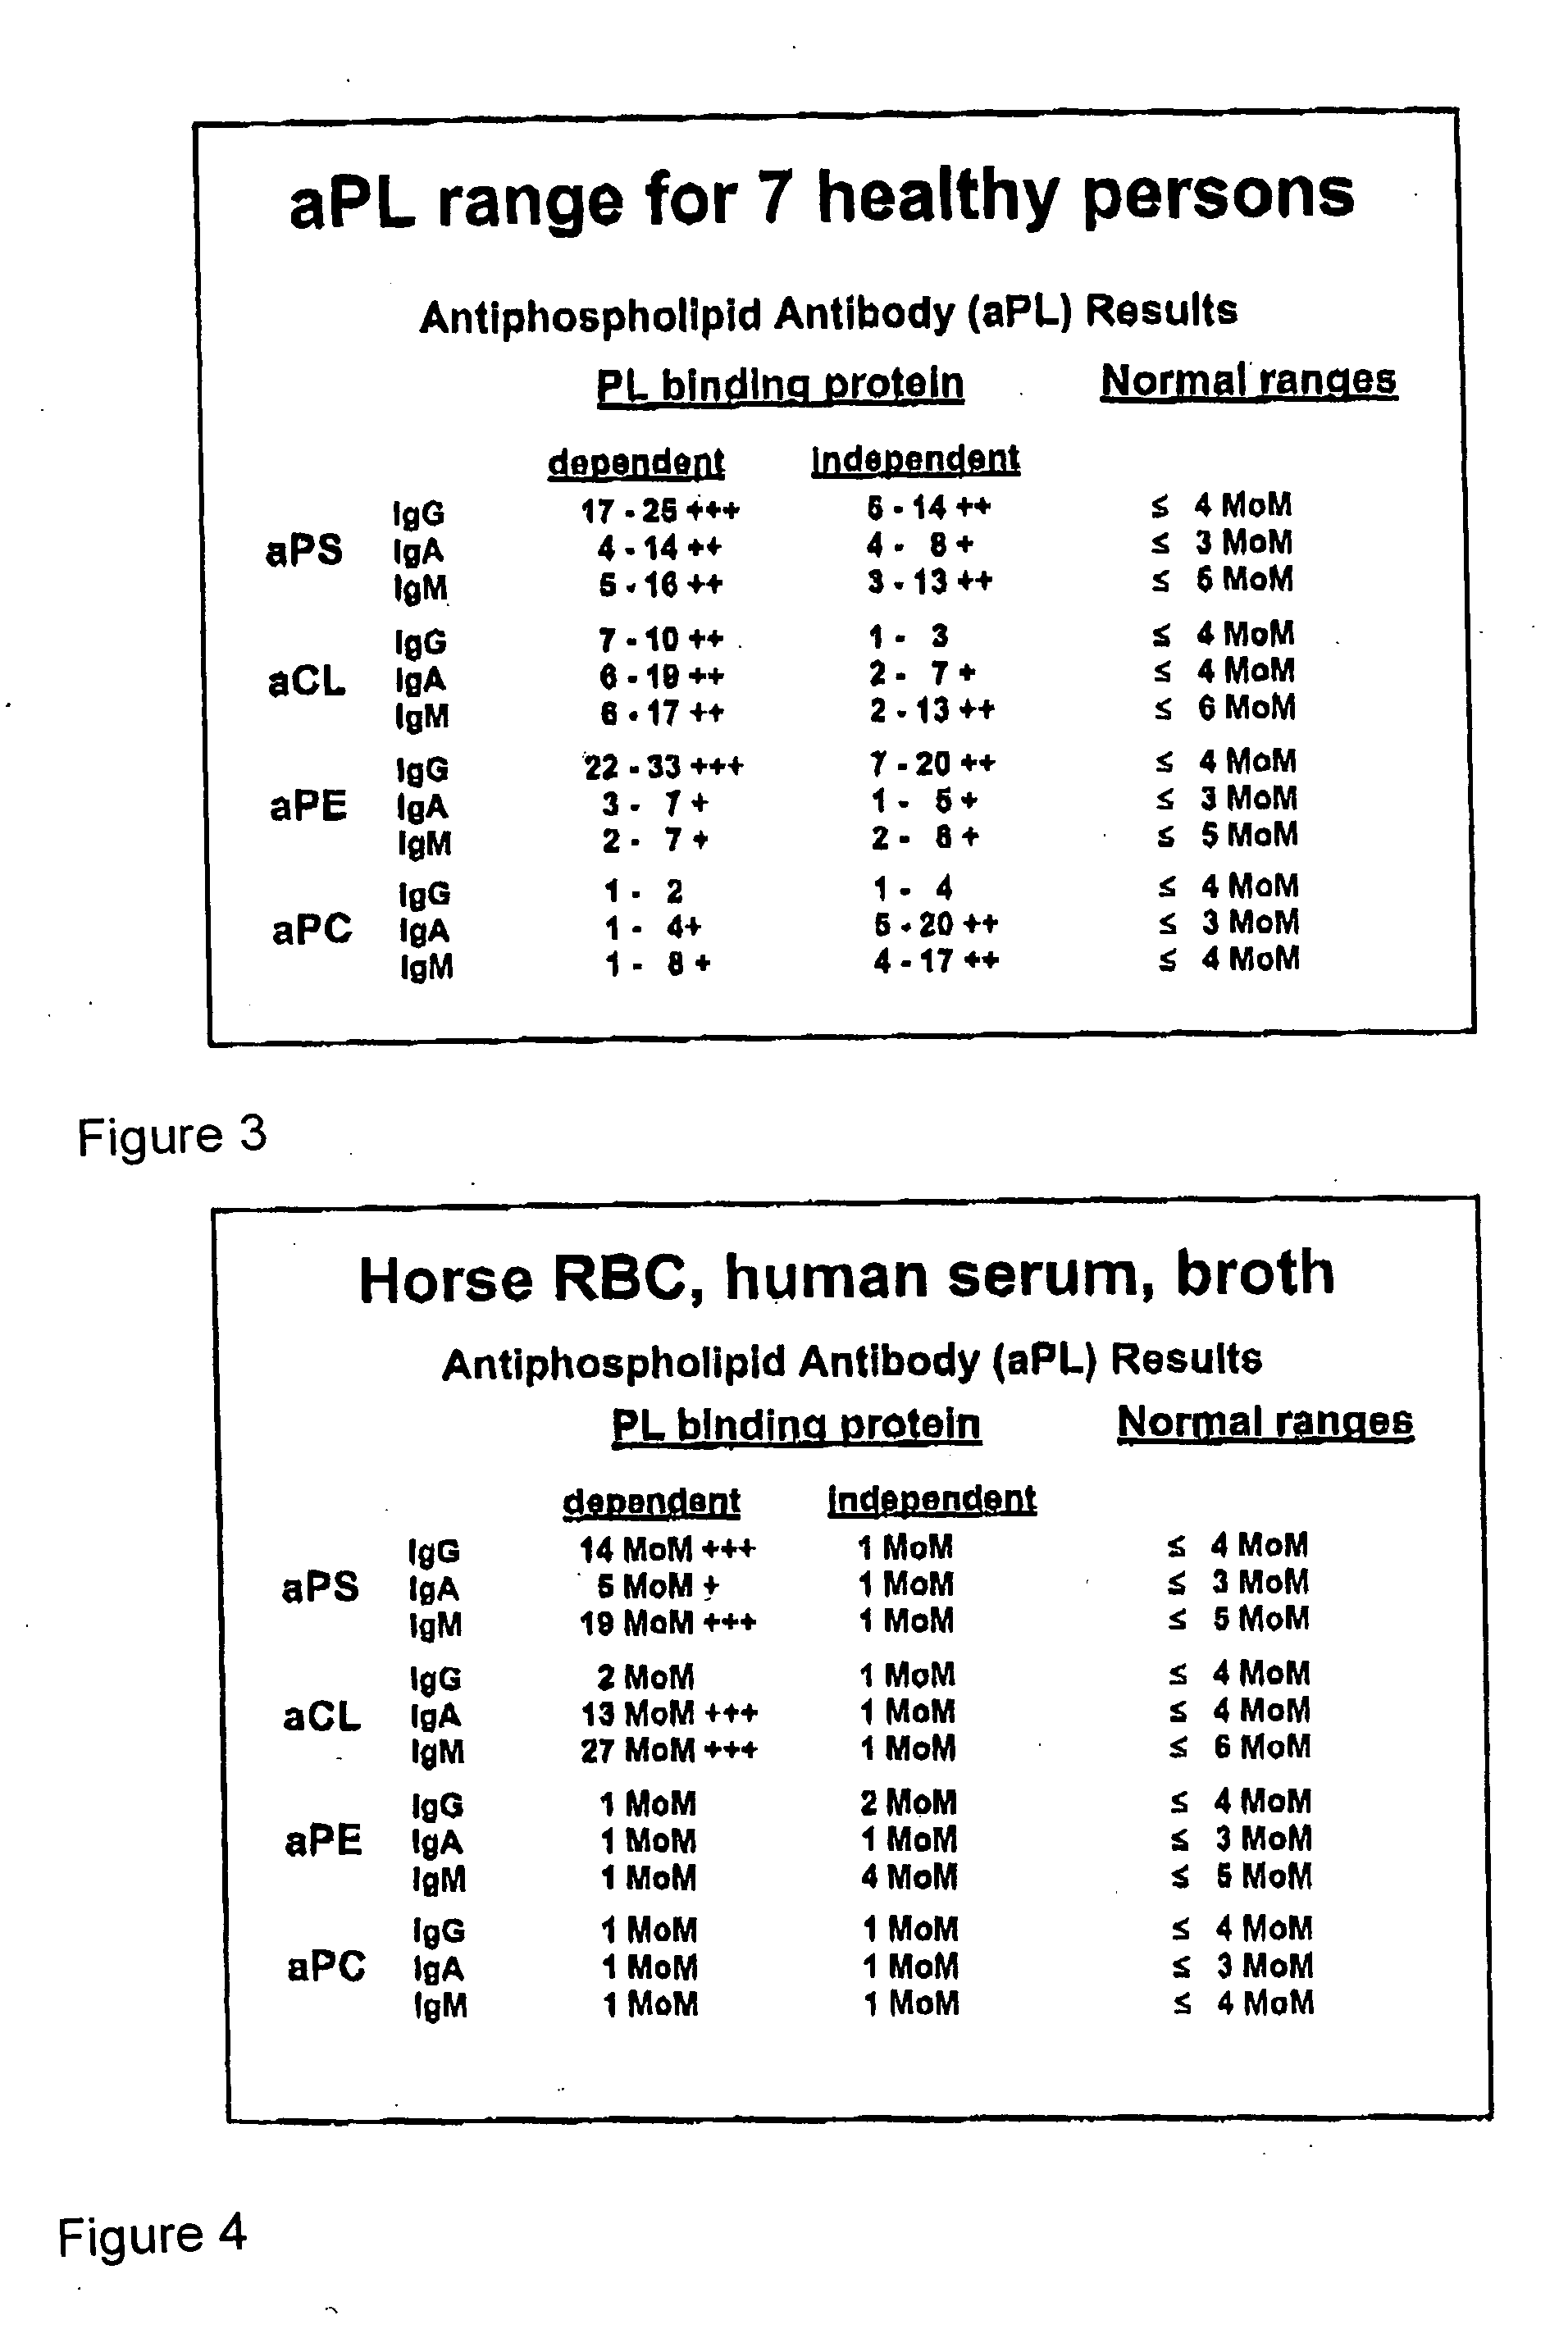 Method of altering the binding specificity of plasma proteins by oxidation-reduction reactions